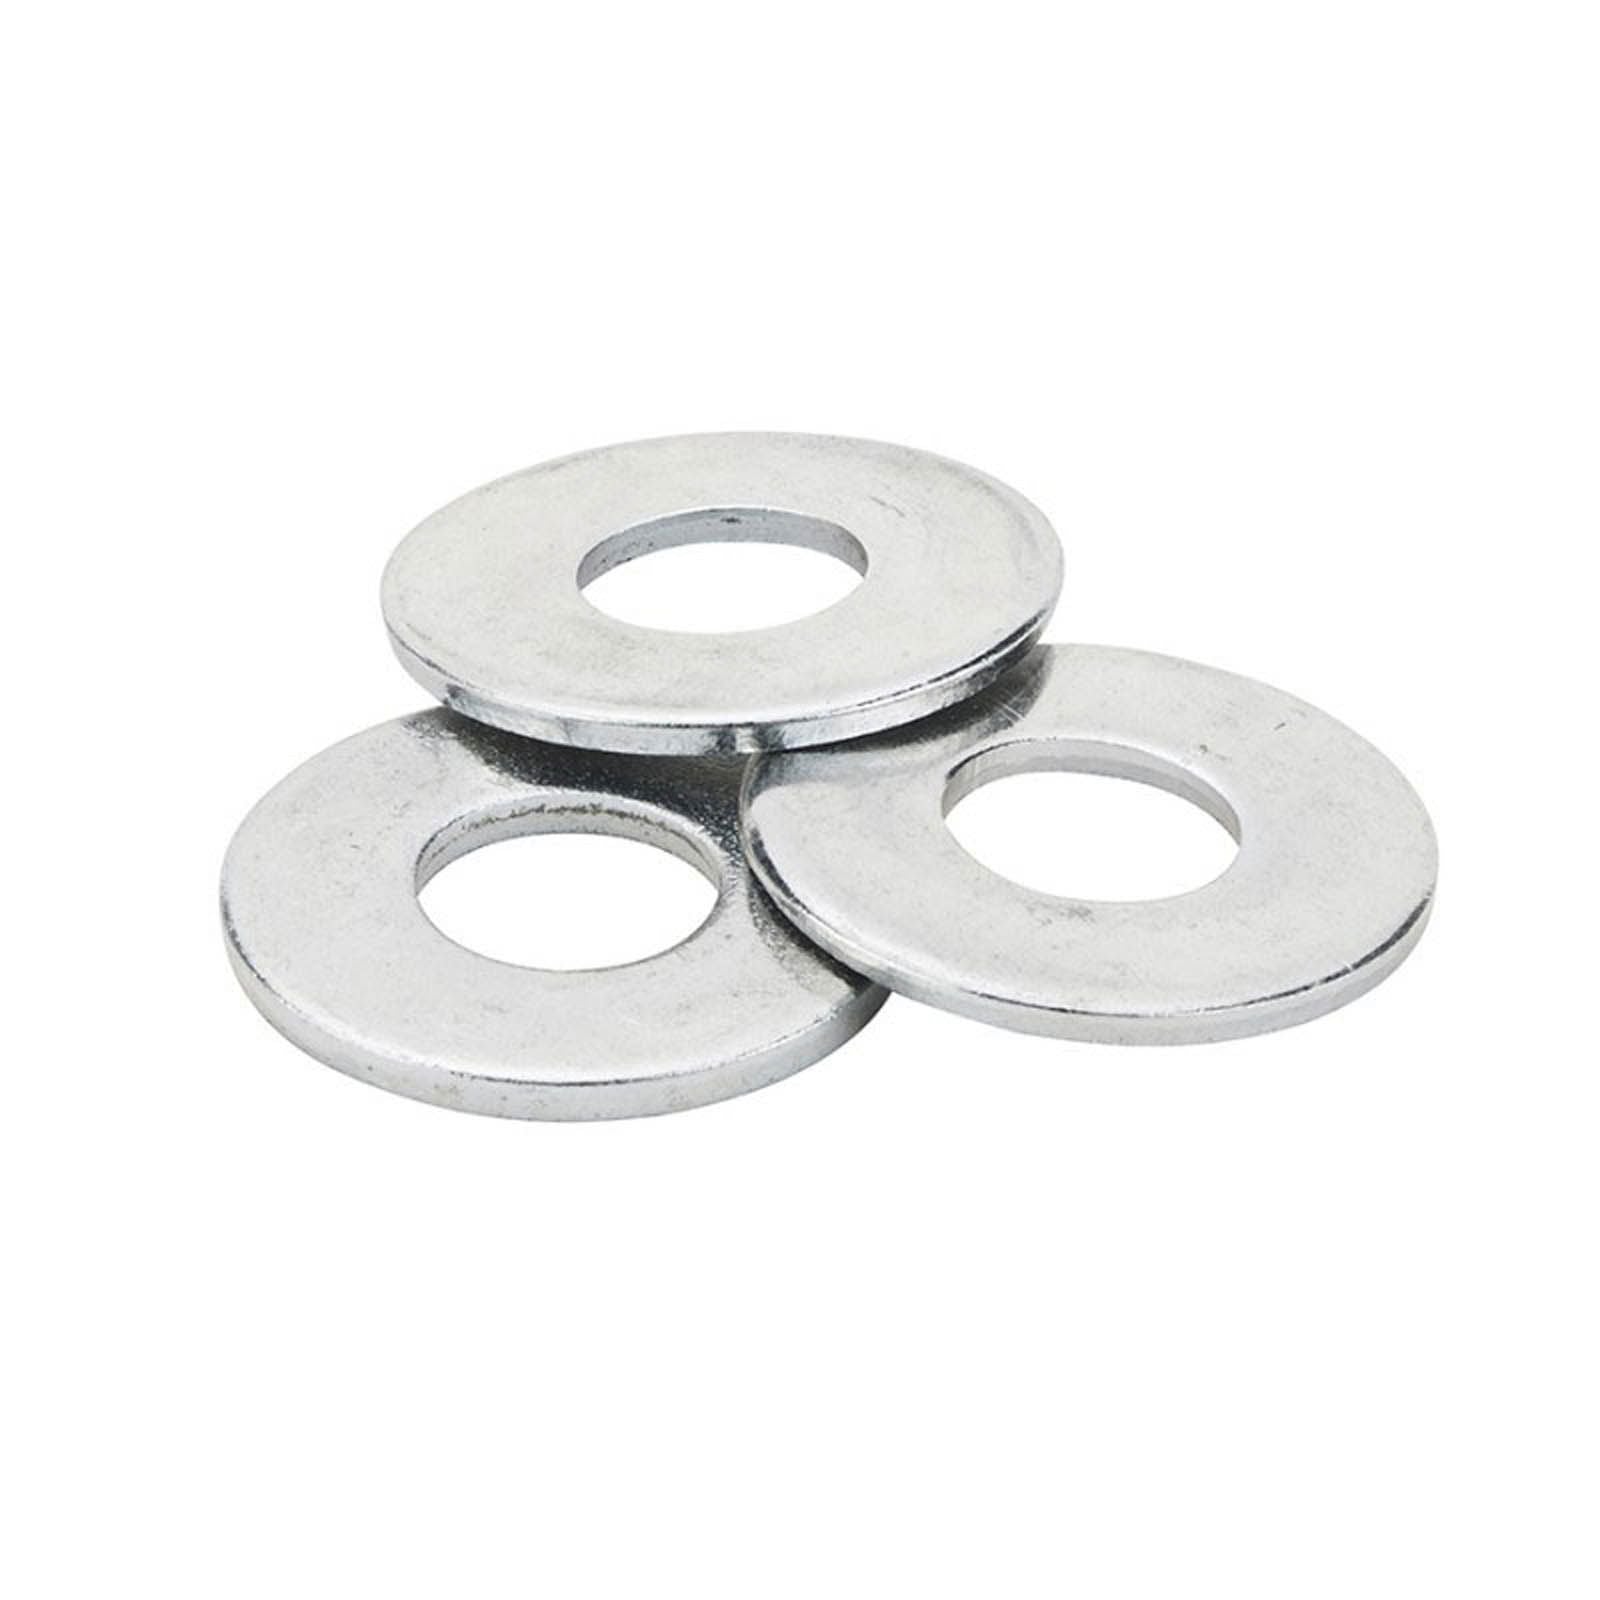 New WHITES Washer Flat Zinc Plated - 5mm (50 Pack) #HWW5